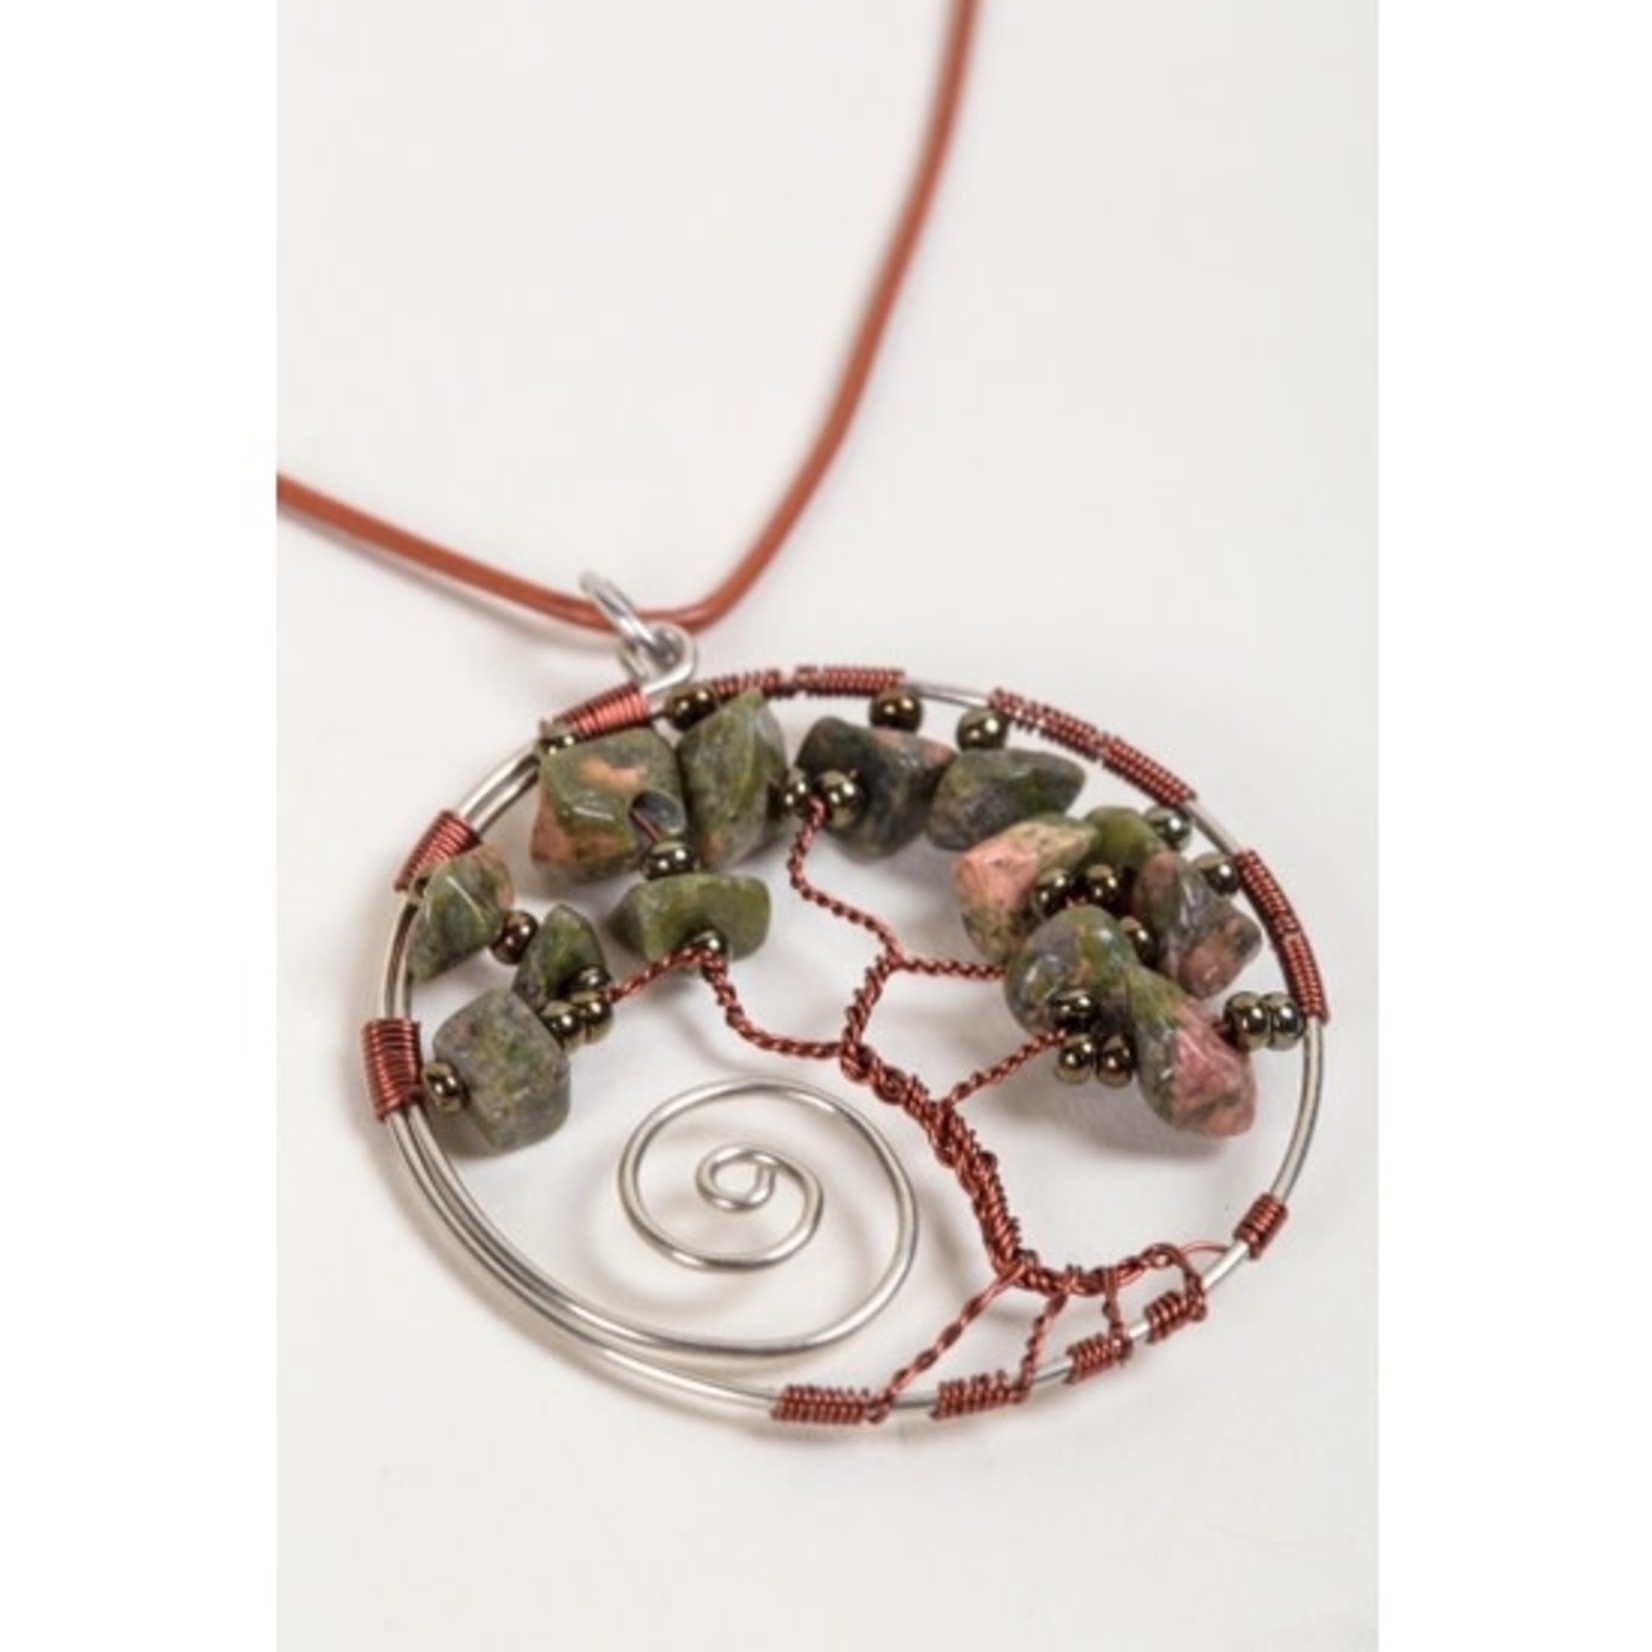 Ten Thousand Villages Twisted Tree Necklace, Guatemala